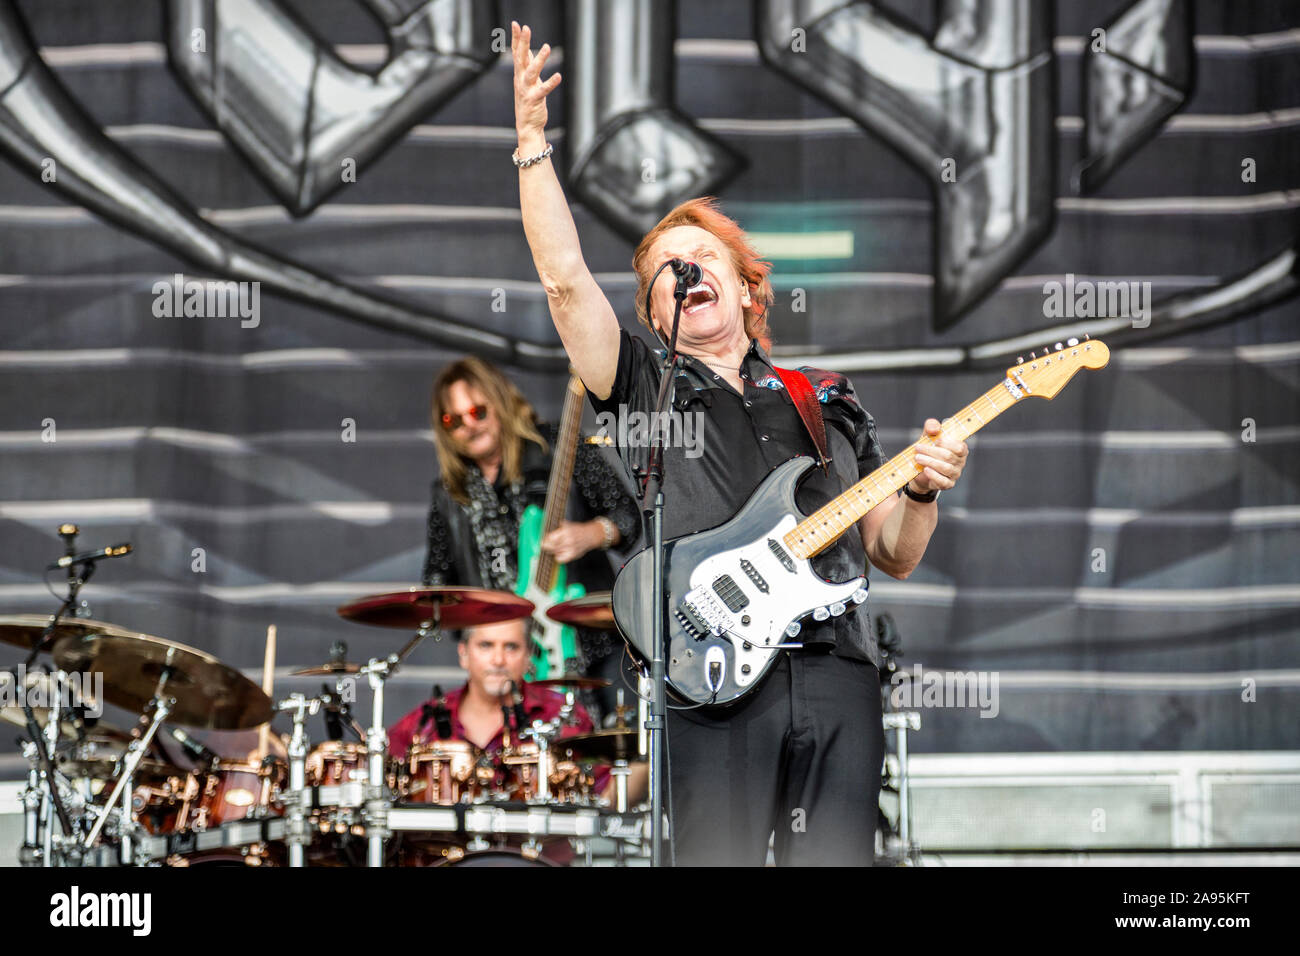 Solvesborg, Sweden. 08th, June 2019. The American rock band Styx performs a live concert during the Swedish music festival Sweden Rock Festival 2019. Here guitarist James Young is seen live on stage. (Photo credit: Gonzales Photo - Terje Dokken). Stock Photo